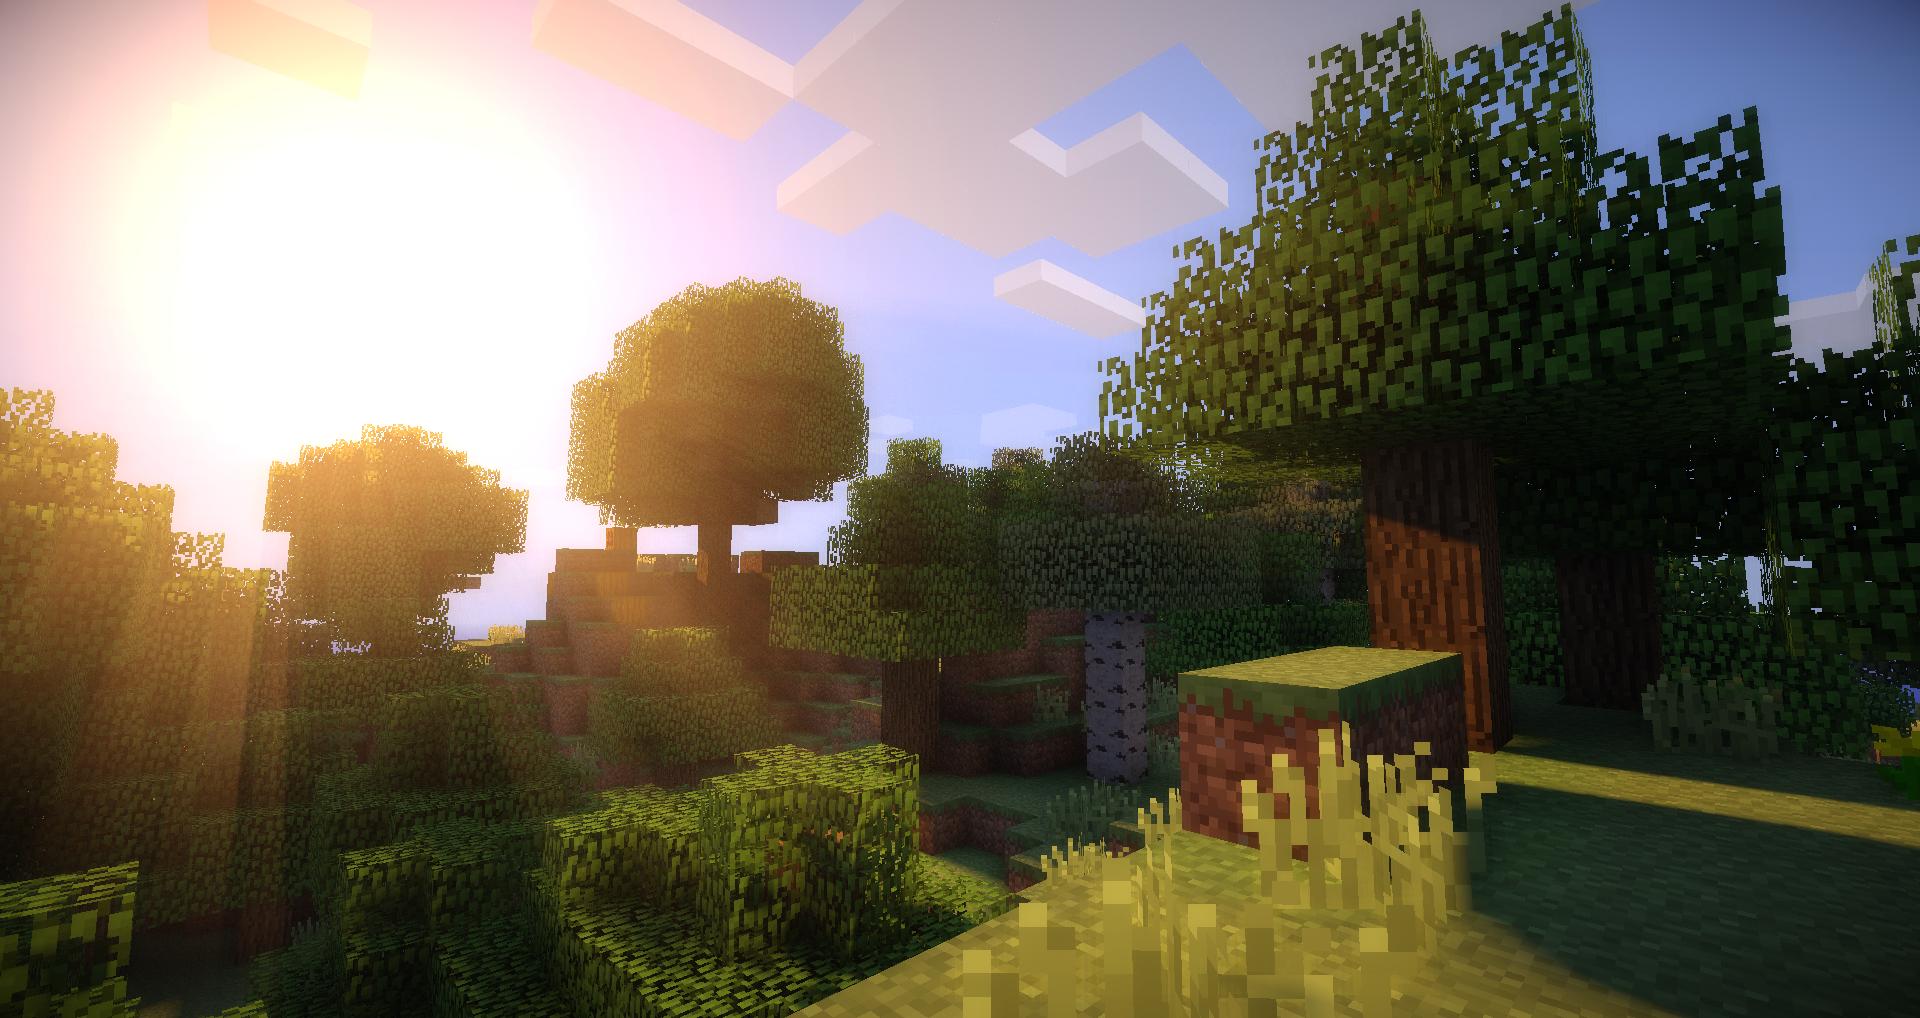 Backgroundi want a shadded minecraft sunrise with trees and hill